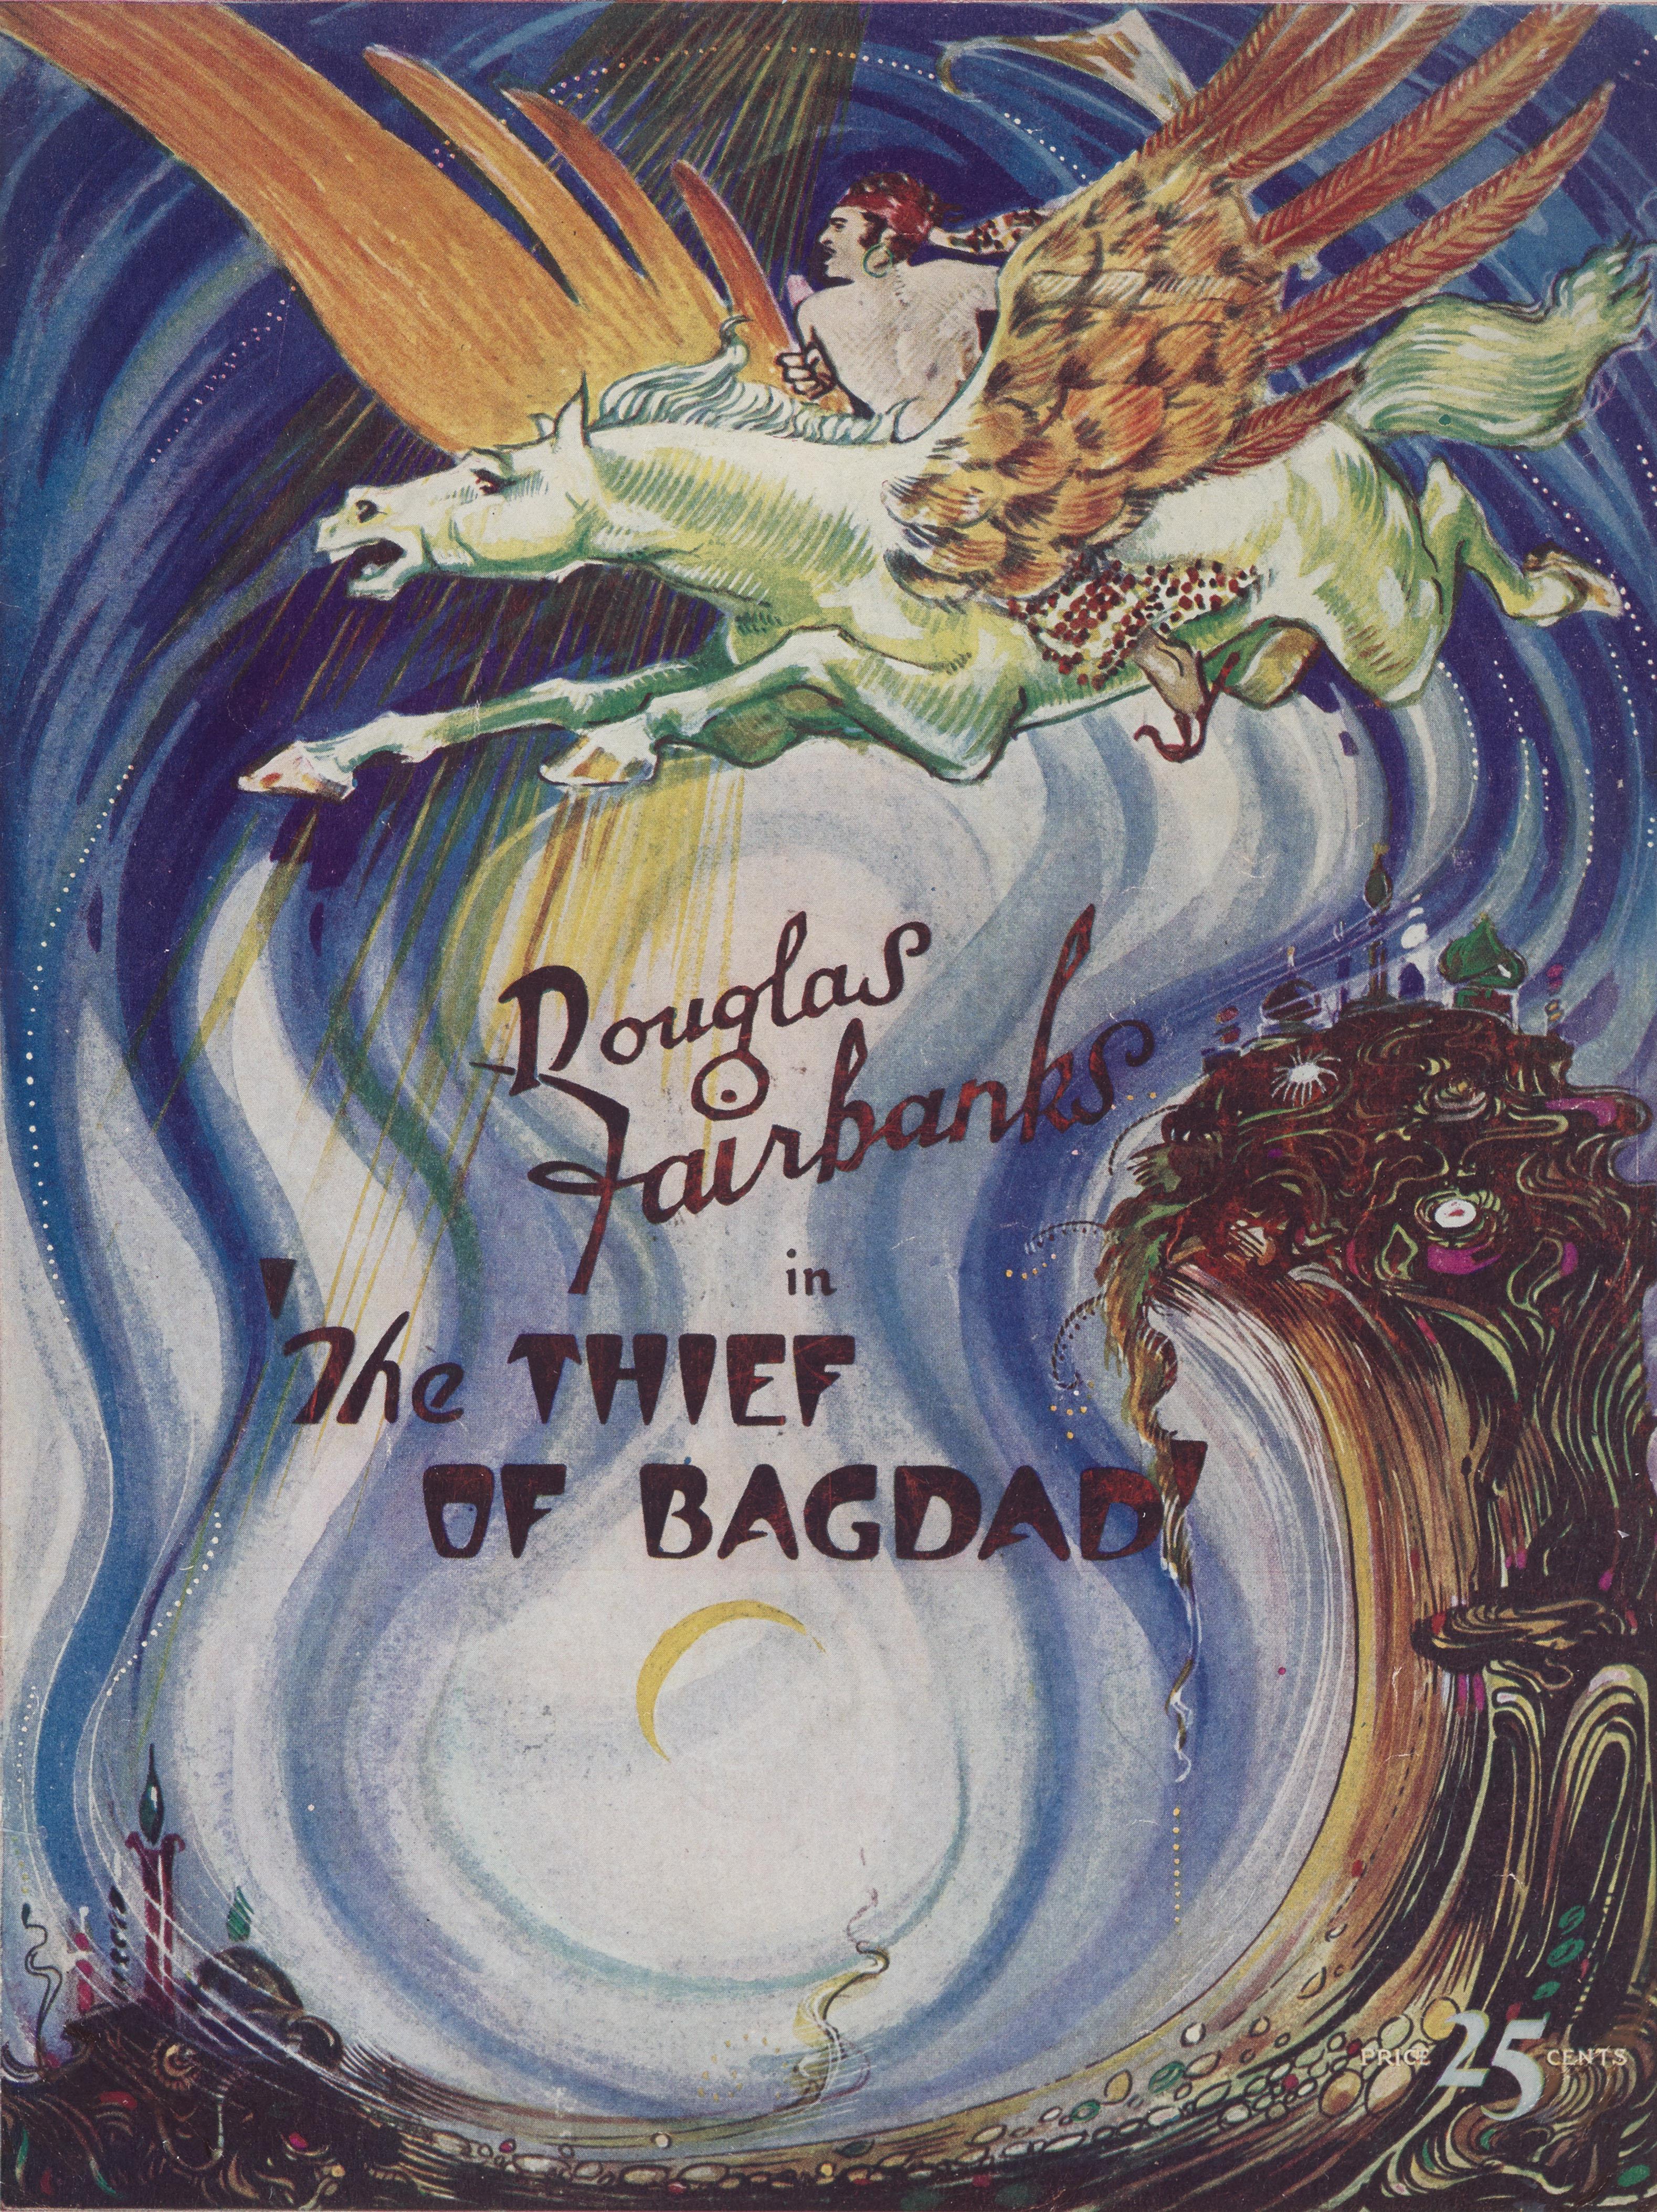 Original American cover of the souvenir program for Douglas Fairbanks clasic 1924 silent fantasy film directed by Raoul Walsh. The artwork on this piece shows Fairbanks on the winged horse. This piece has been conservation paper backed and